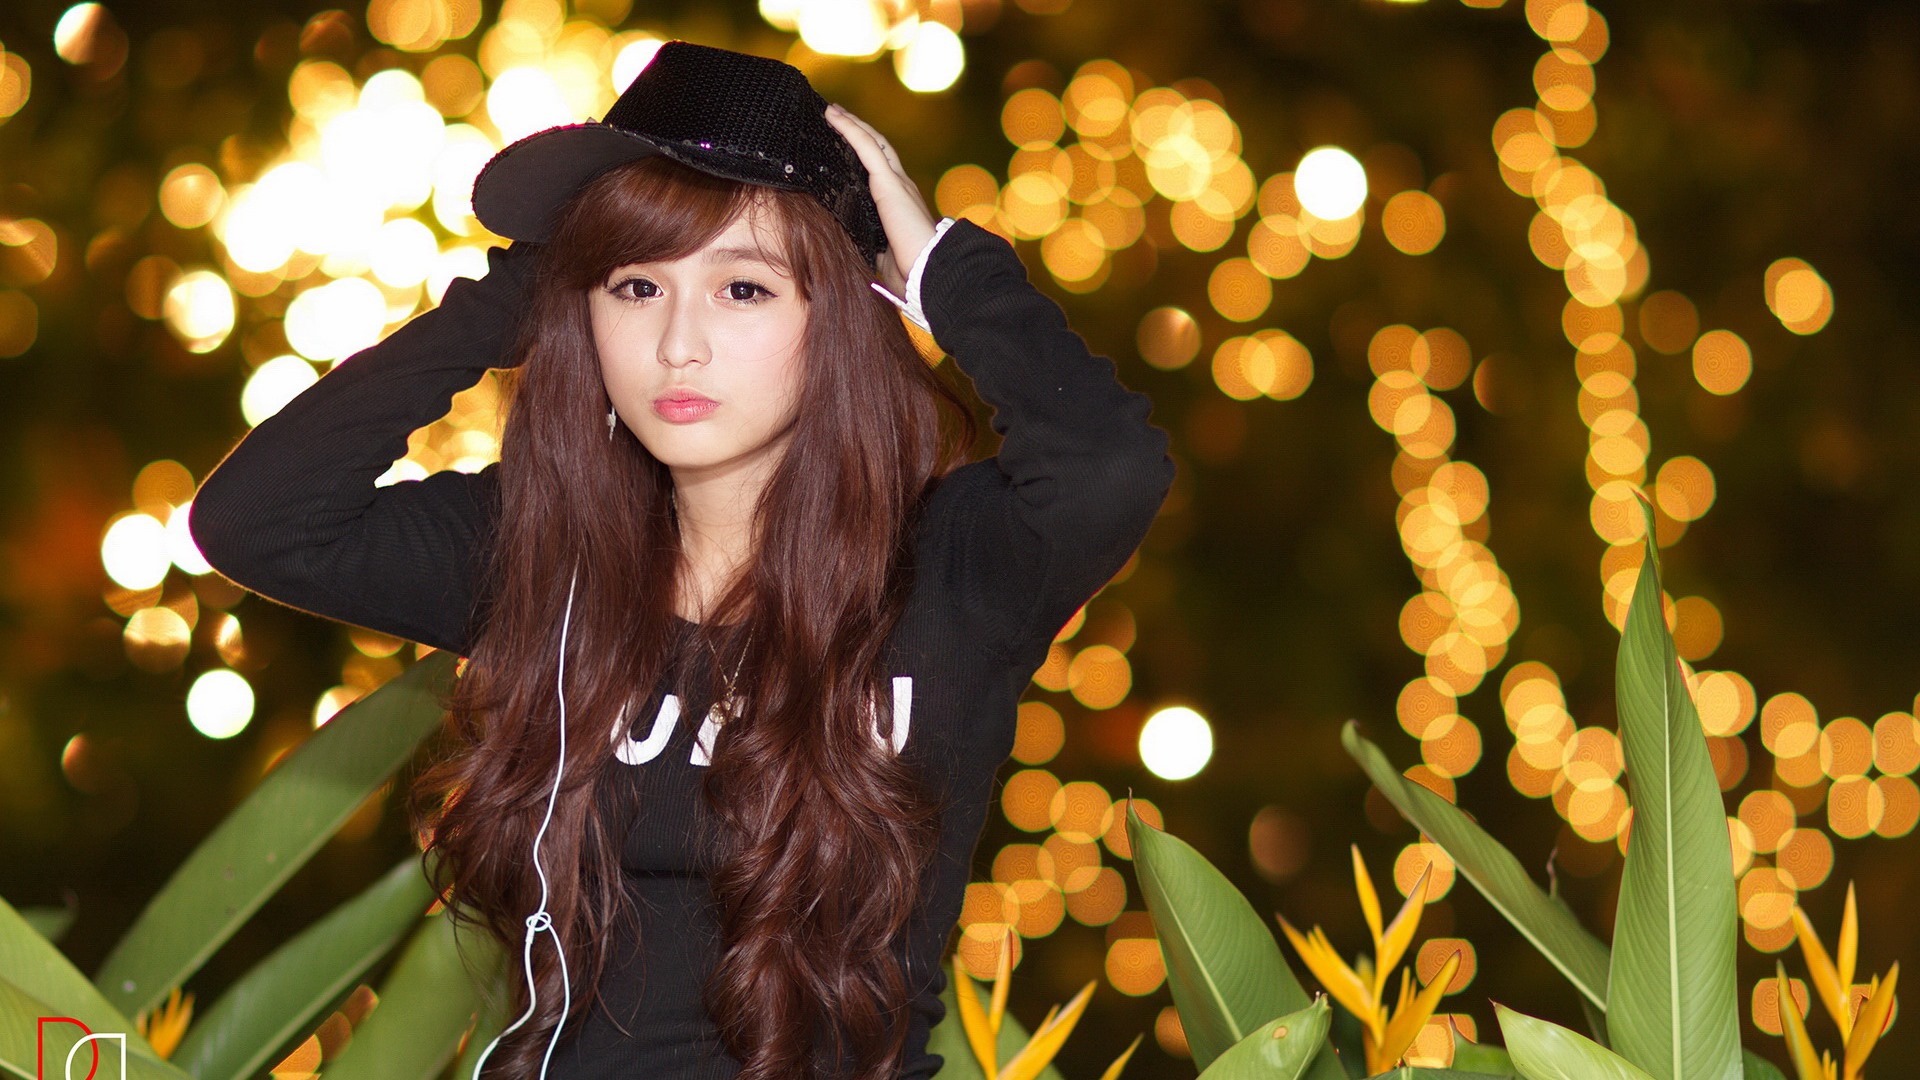 Pure and lovely young Asian girl HD wallpapers collection (5) #27 - 1920x1080